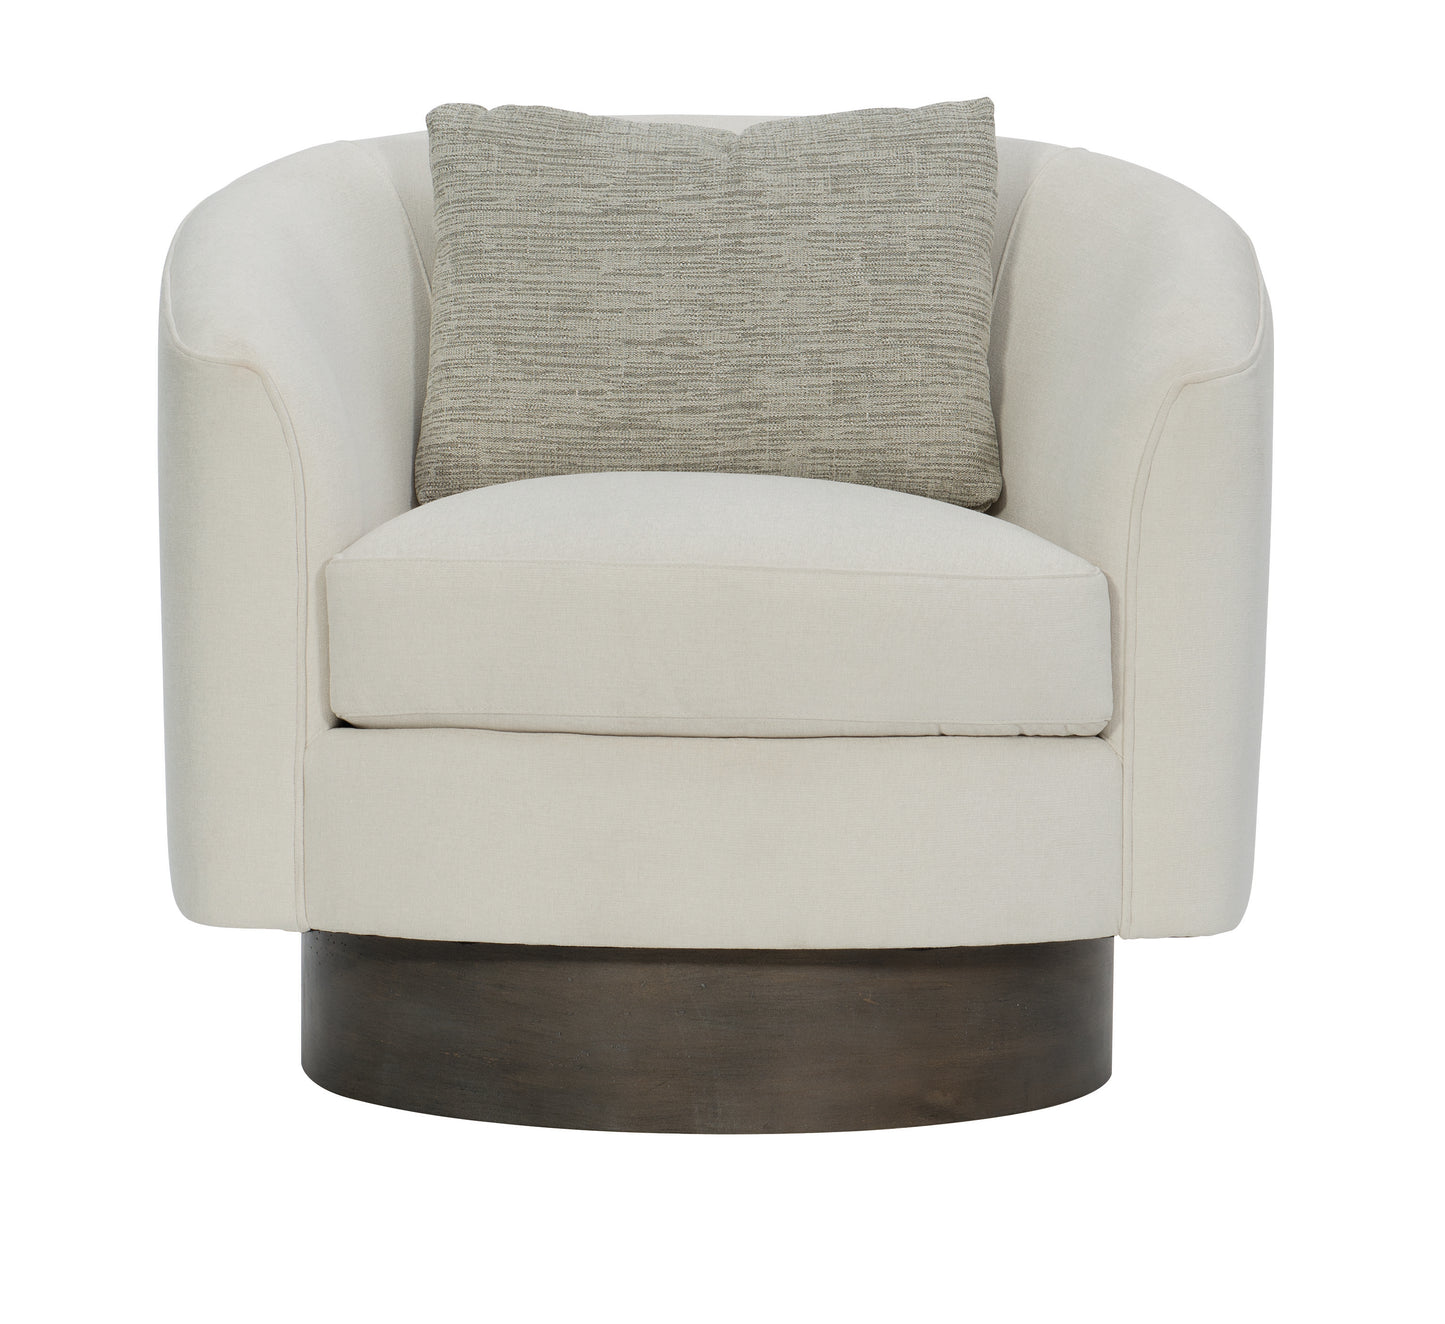 Camino Leather Swivel Chair